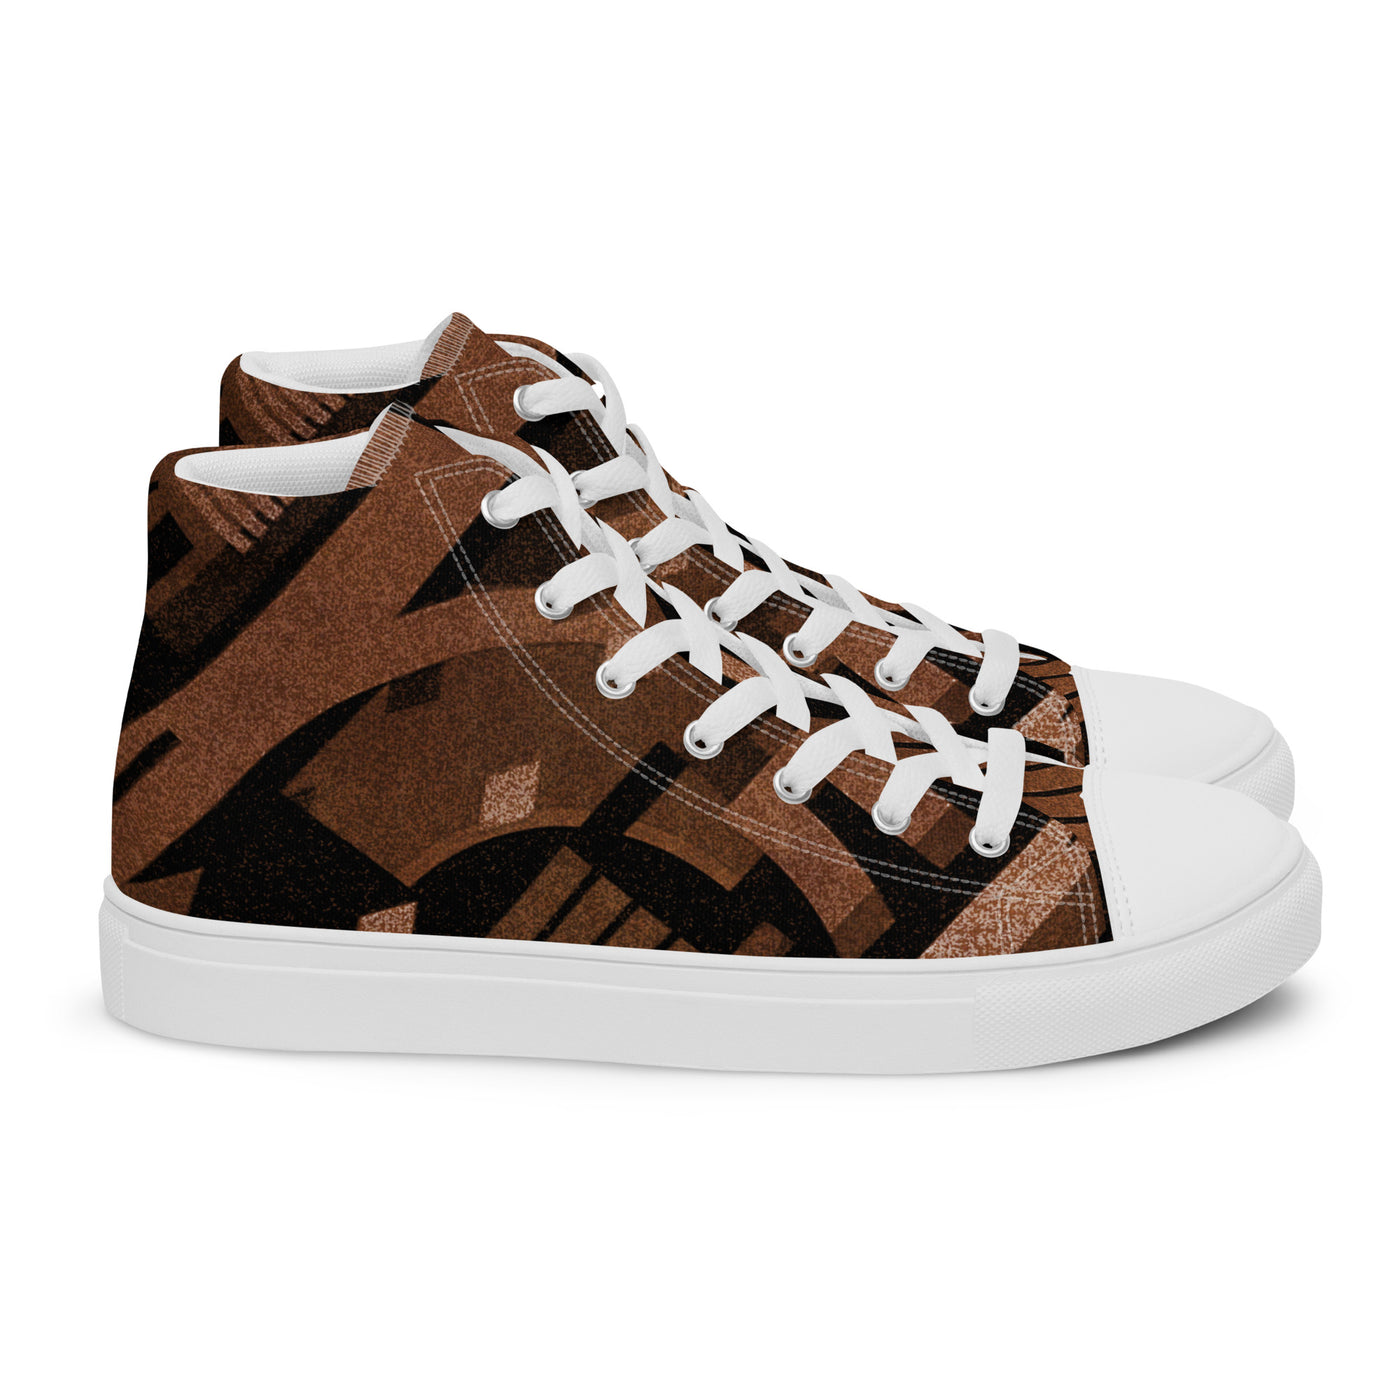 TechAbstract 1 Brown - Men's High Top Canvas Shoes